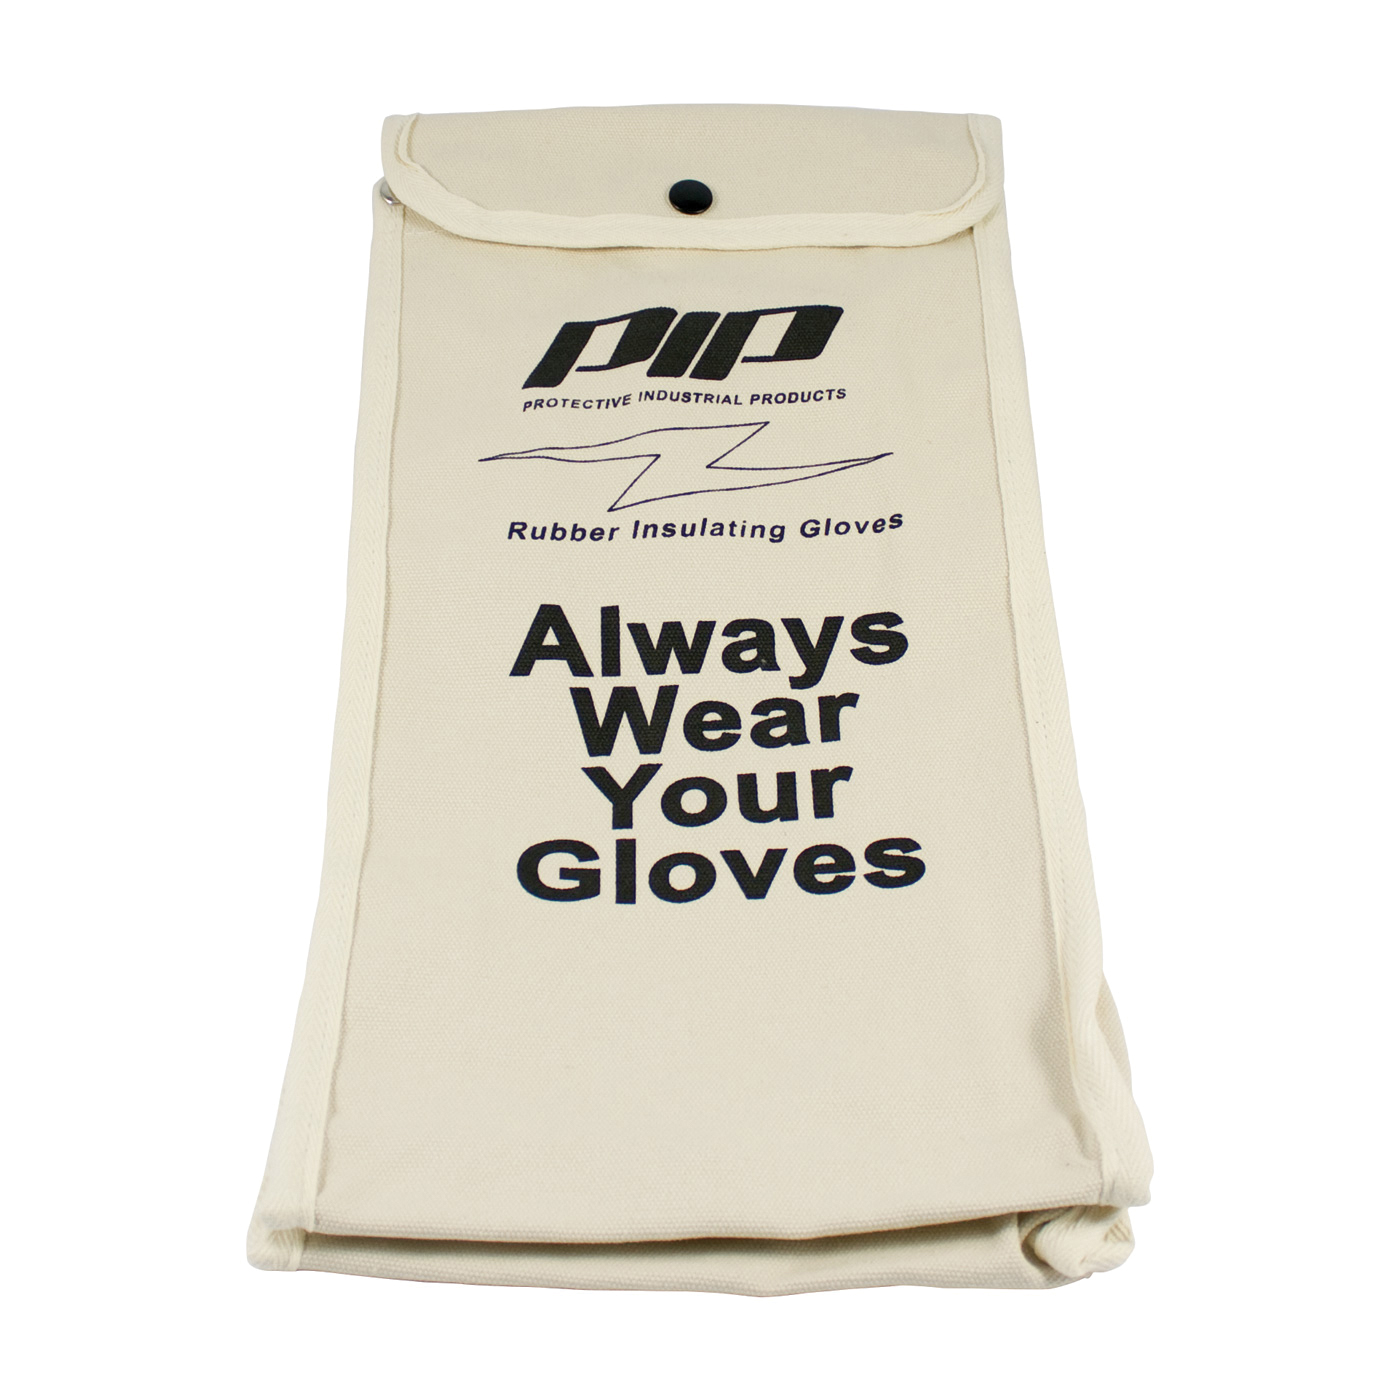 Novax® 148-6016 Protective Bag, Snap Closure, For Use With 16 in Insulating Gloves, Cotton Canvas, Natural with Black Lettering